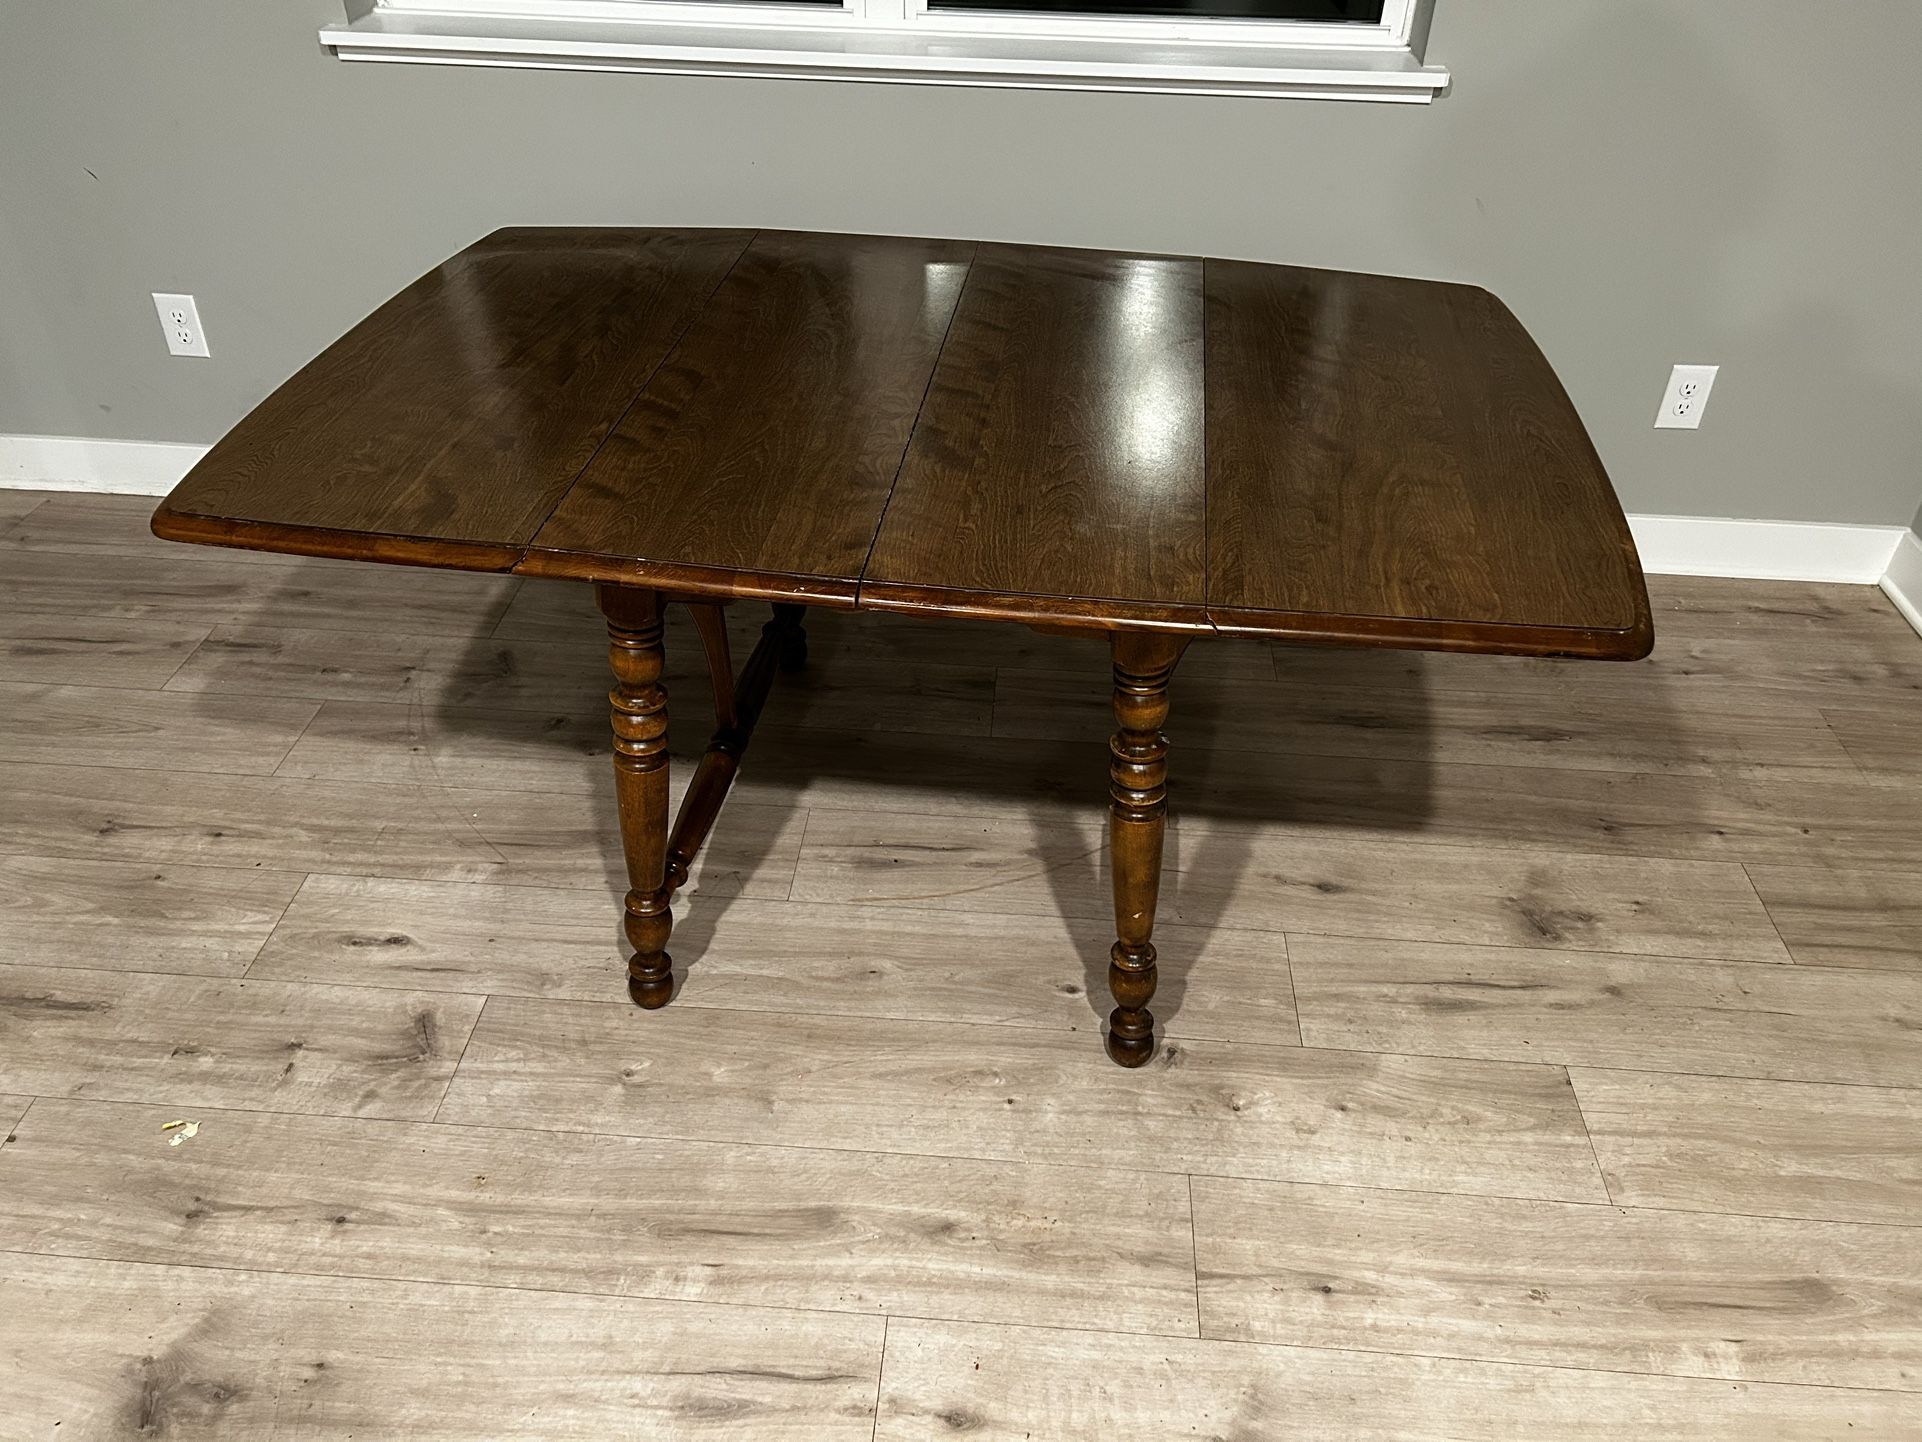 Dining (Foldable)Table for 4-6 Kitchen Table with Wood Sintered Table Top.